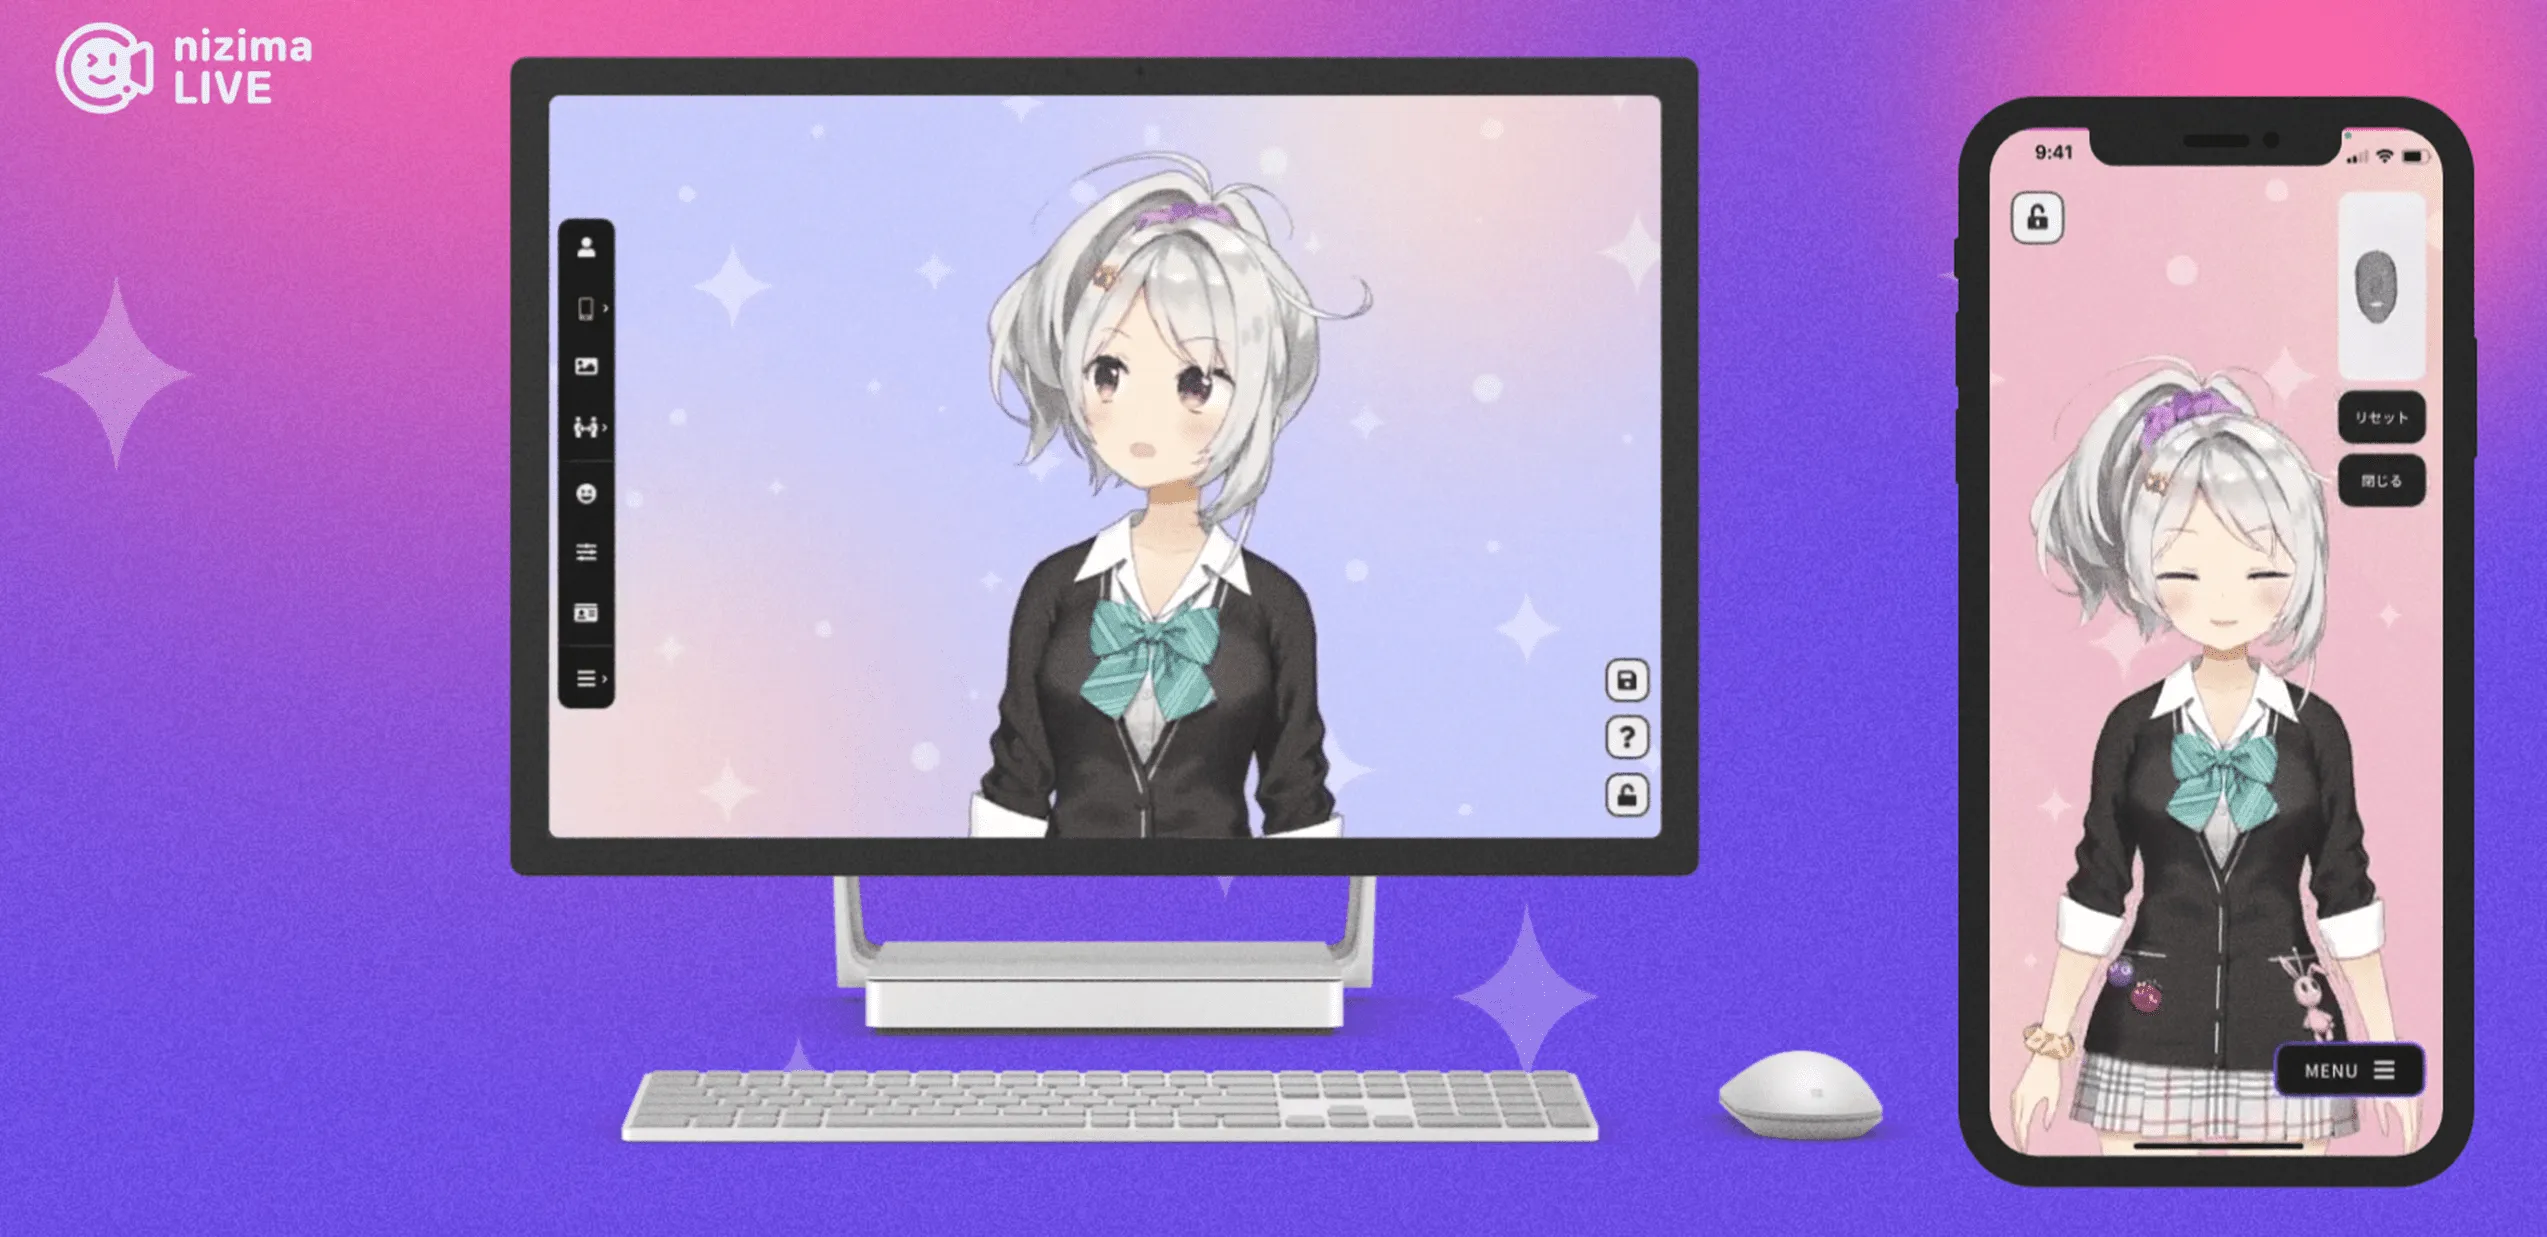 Become the waifu of your dreams with FaceRigs Live2D module Video   SoraNews24 Japan News